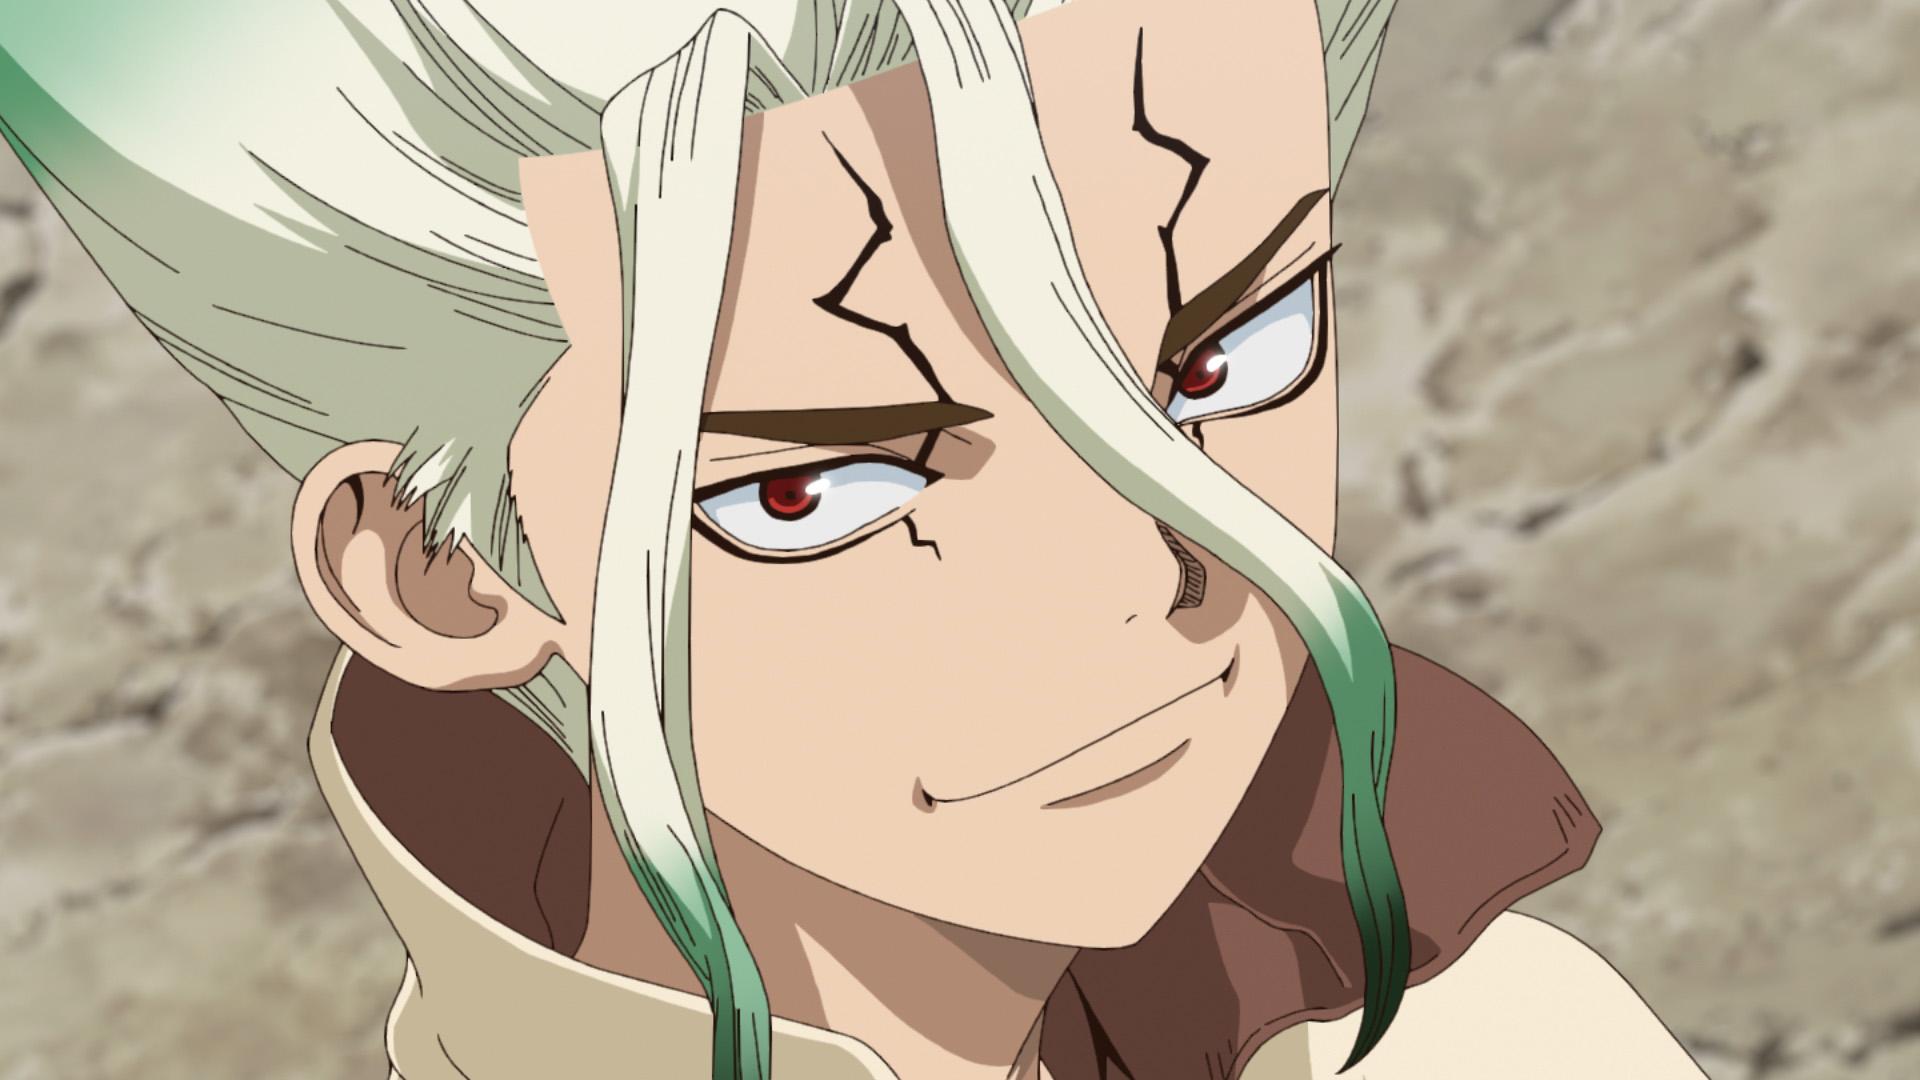 Dr Stone Season 3 Episode 11 Release Date And What To Expect